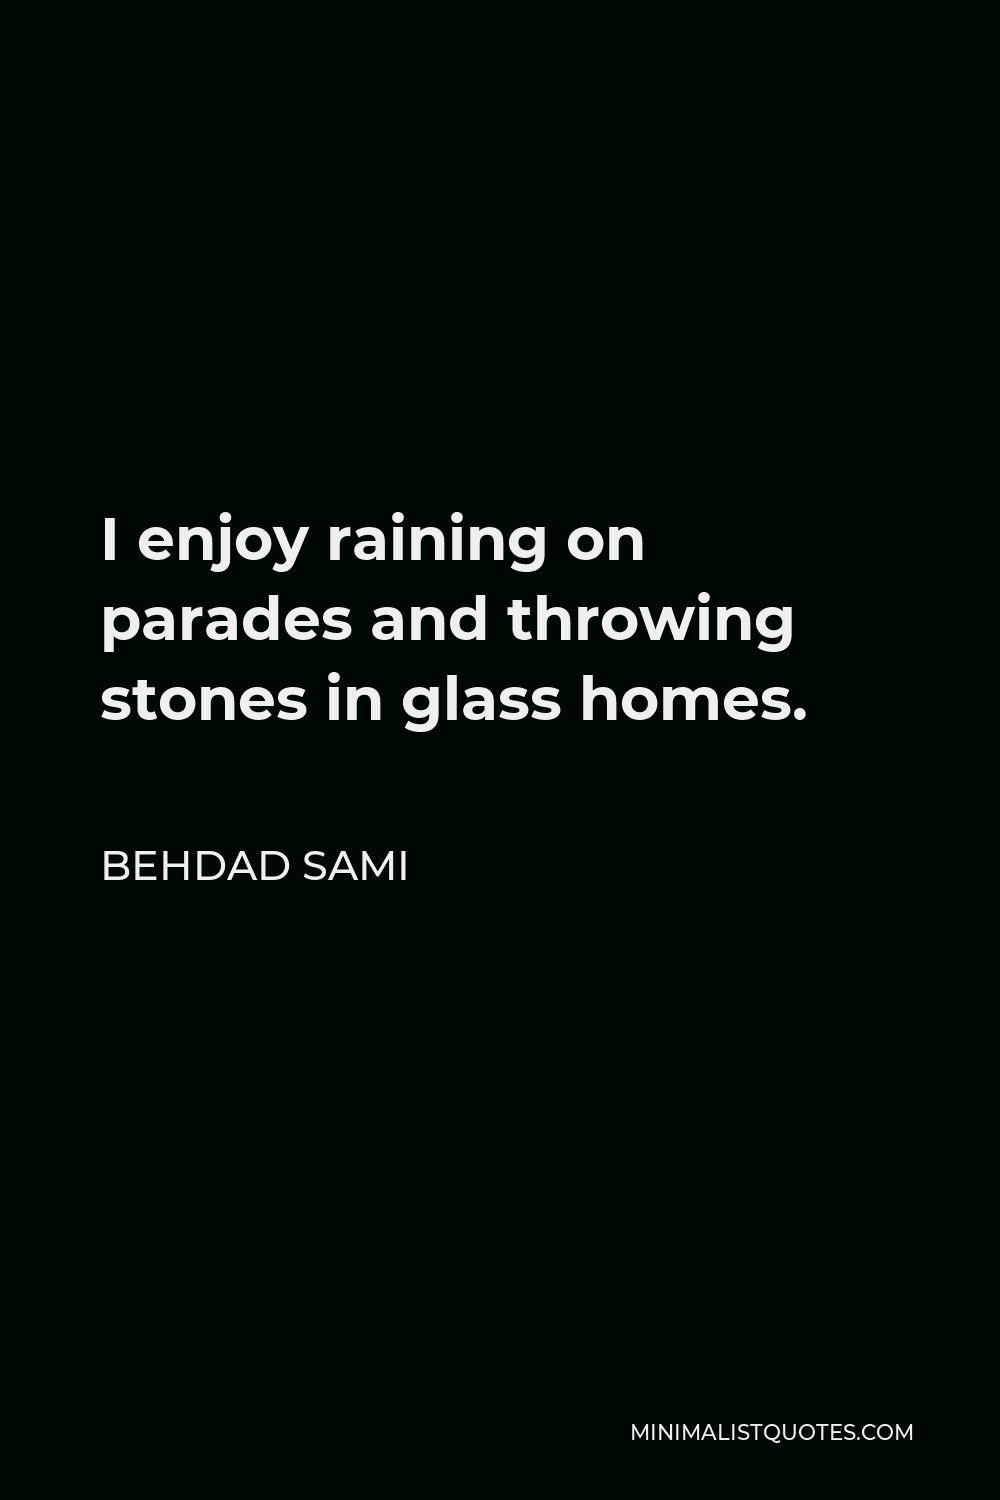 Behdad Sami Quote - I enjoy raining on parades and throwing stones in glass homes.